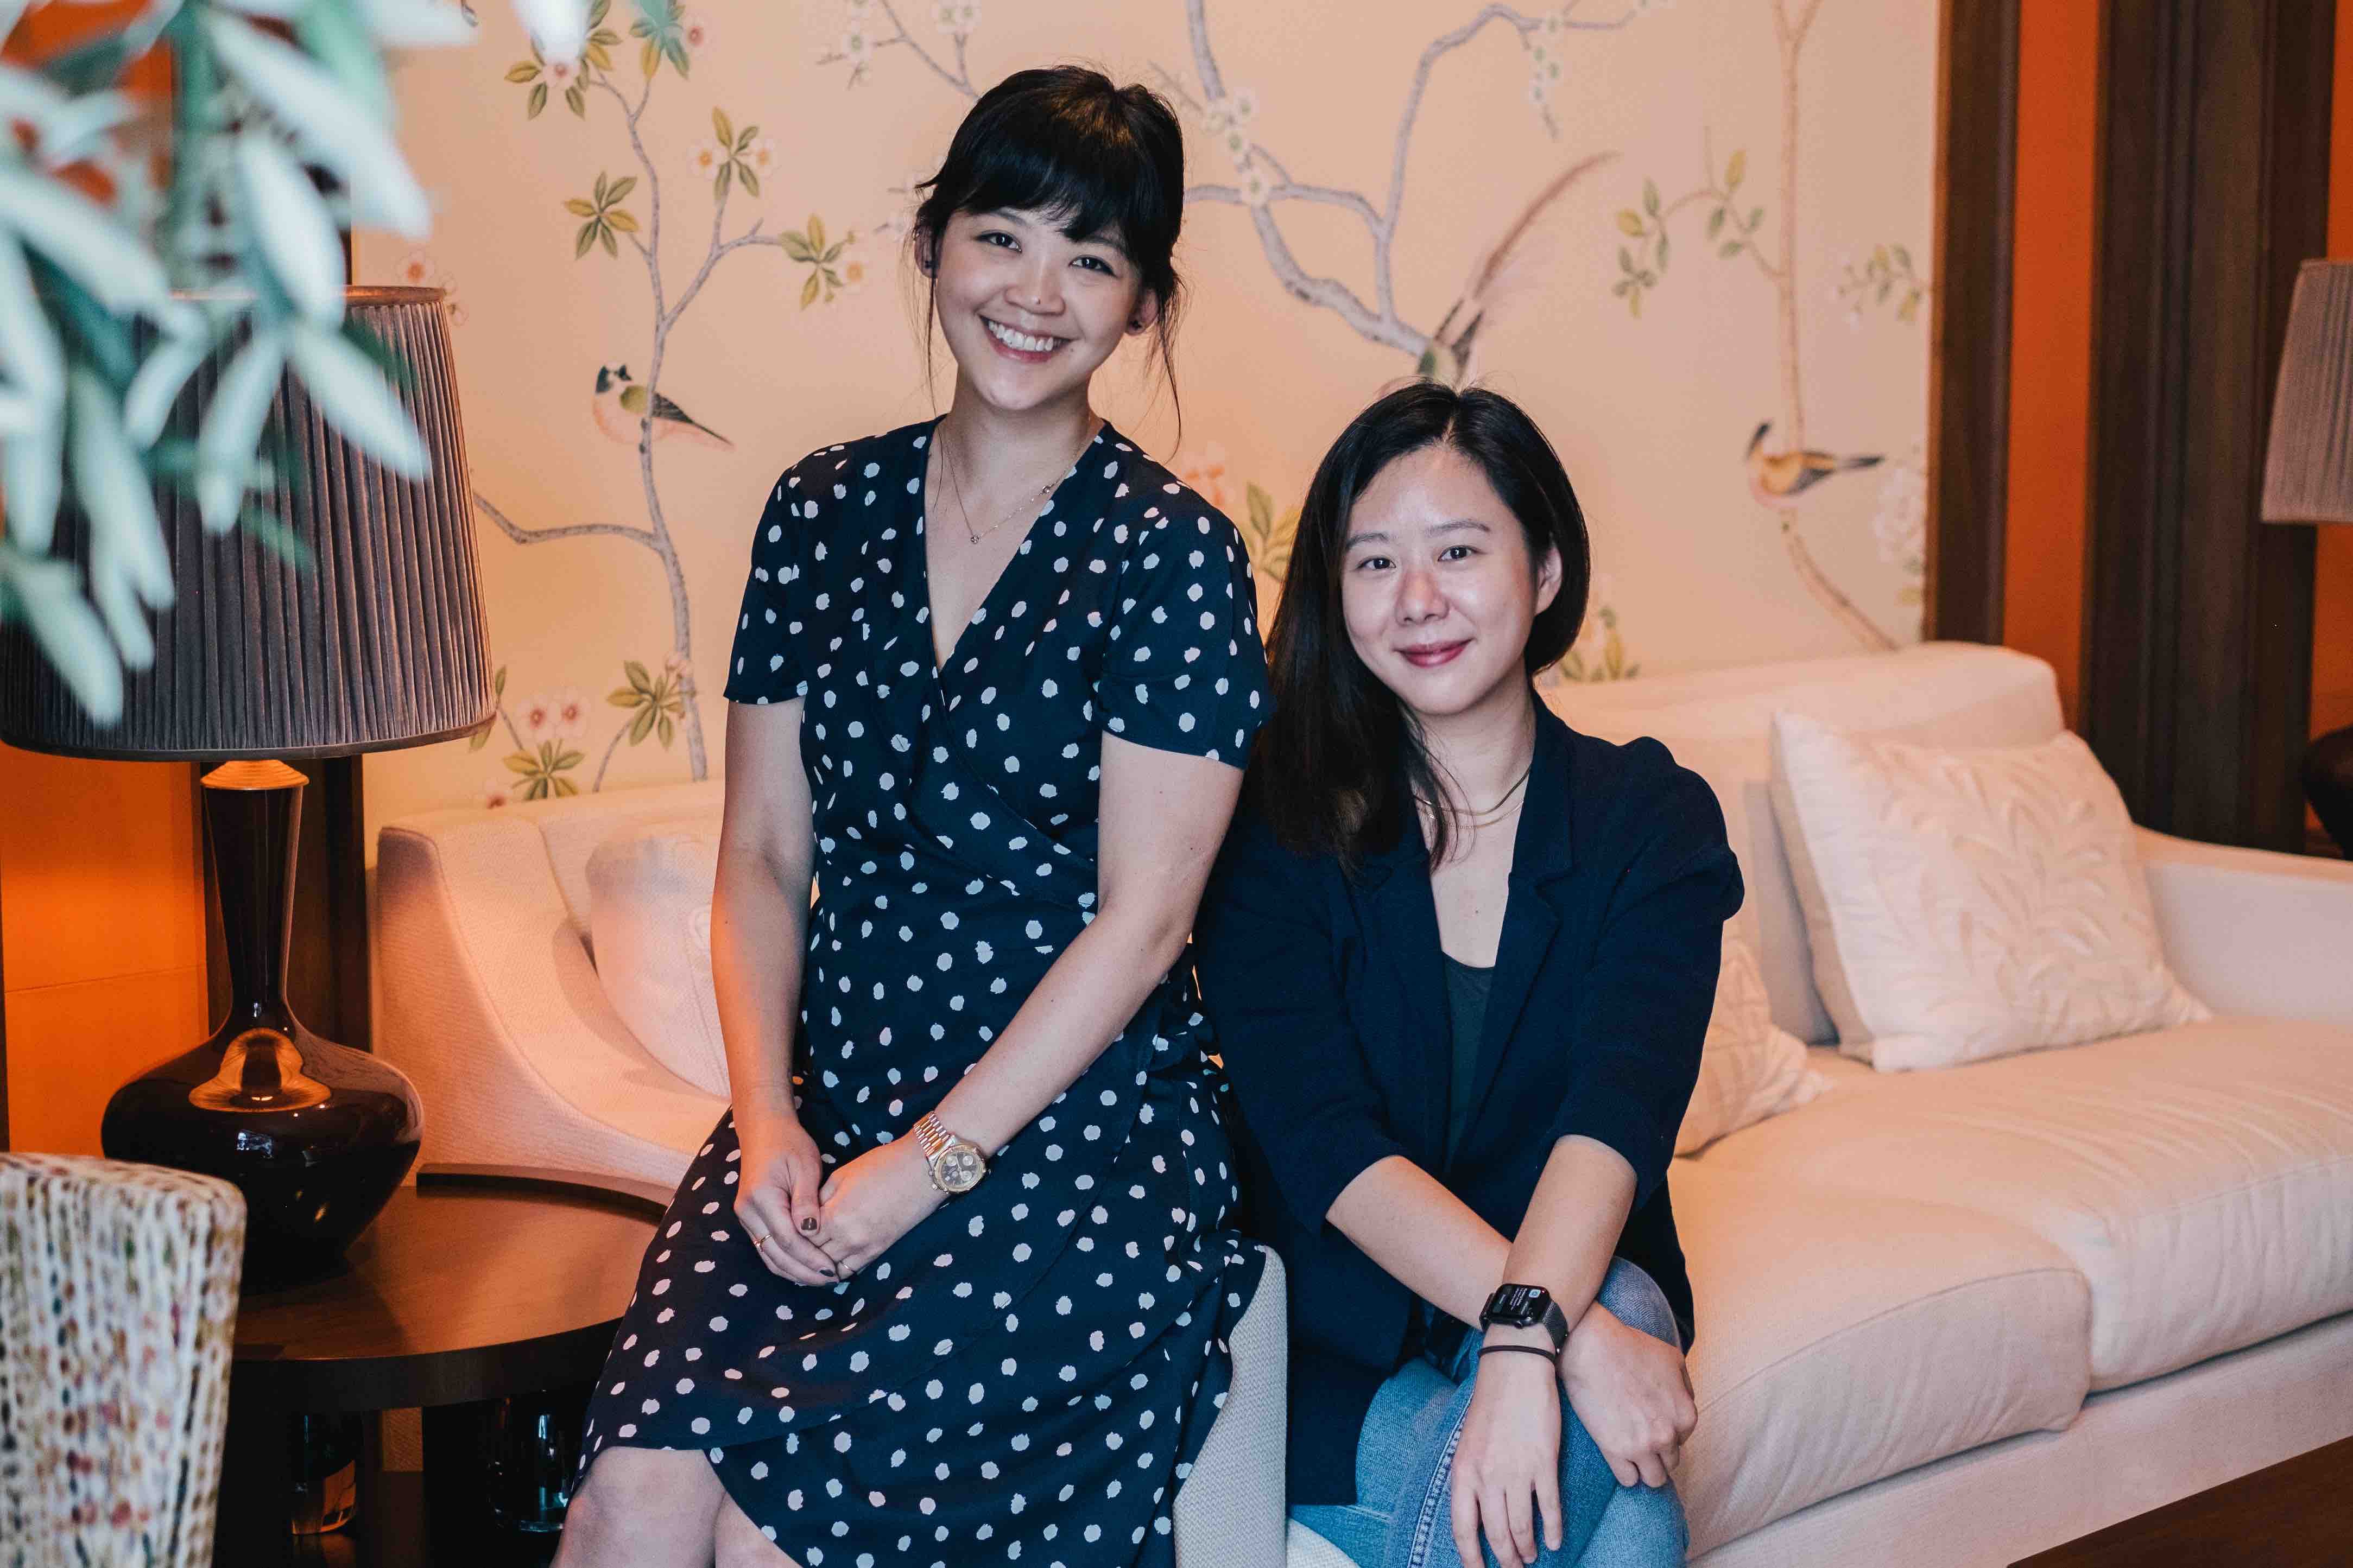 ZumVet co-founders Athena Lee and Grace Su